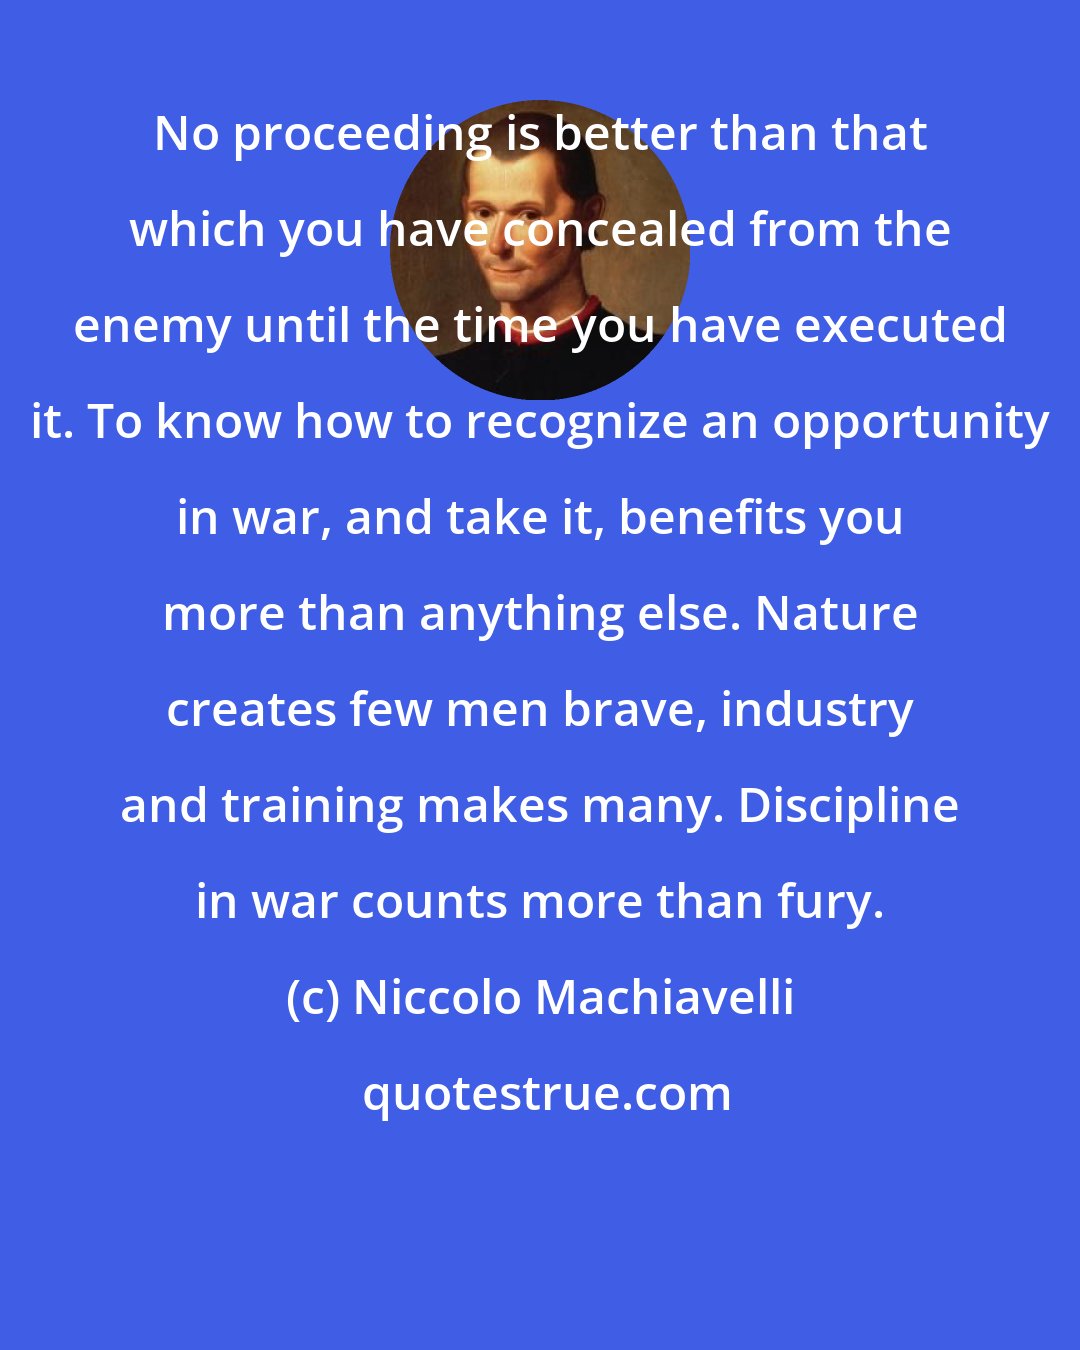 Niccolo Machiavelli: No proceeding is better than that which you have concealed from the enemy until the time you have executed it. To know how to recognize an opportunity in war, and take it, benefits you more than anything else. Nature creates few men brave, industry and training makes many. Discipline in war counts more than fury.